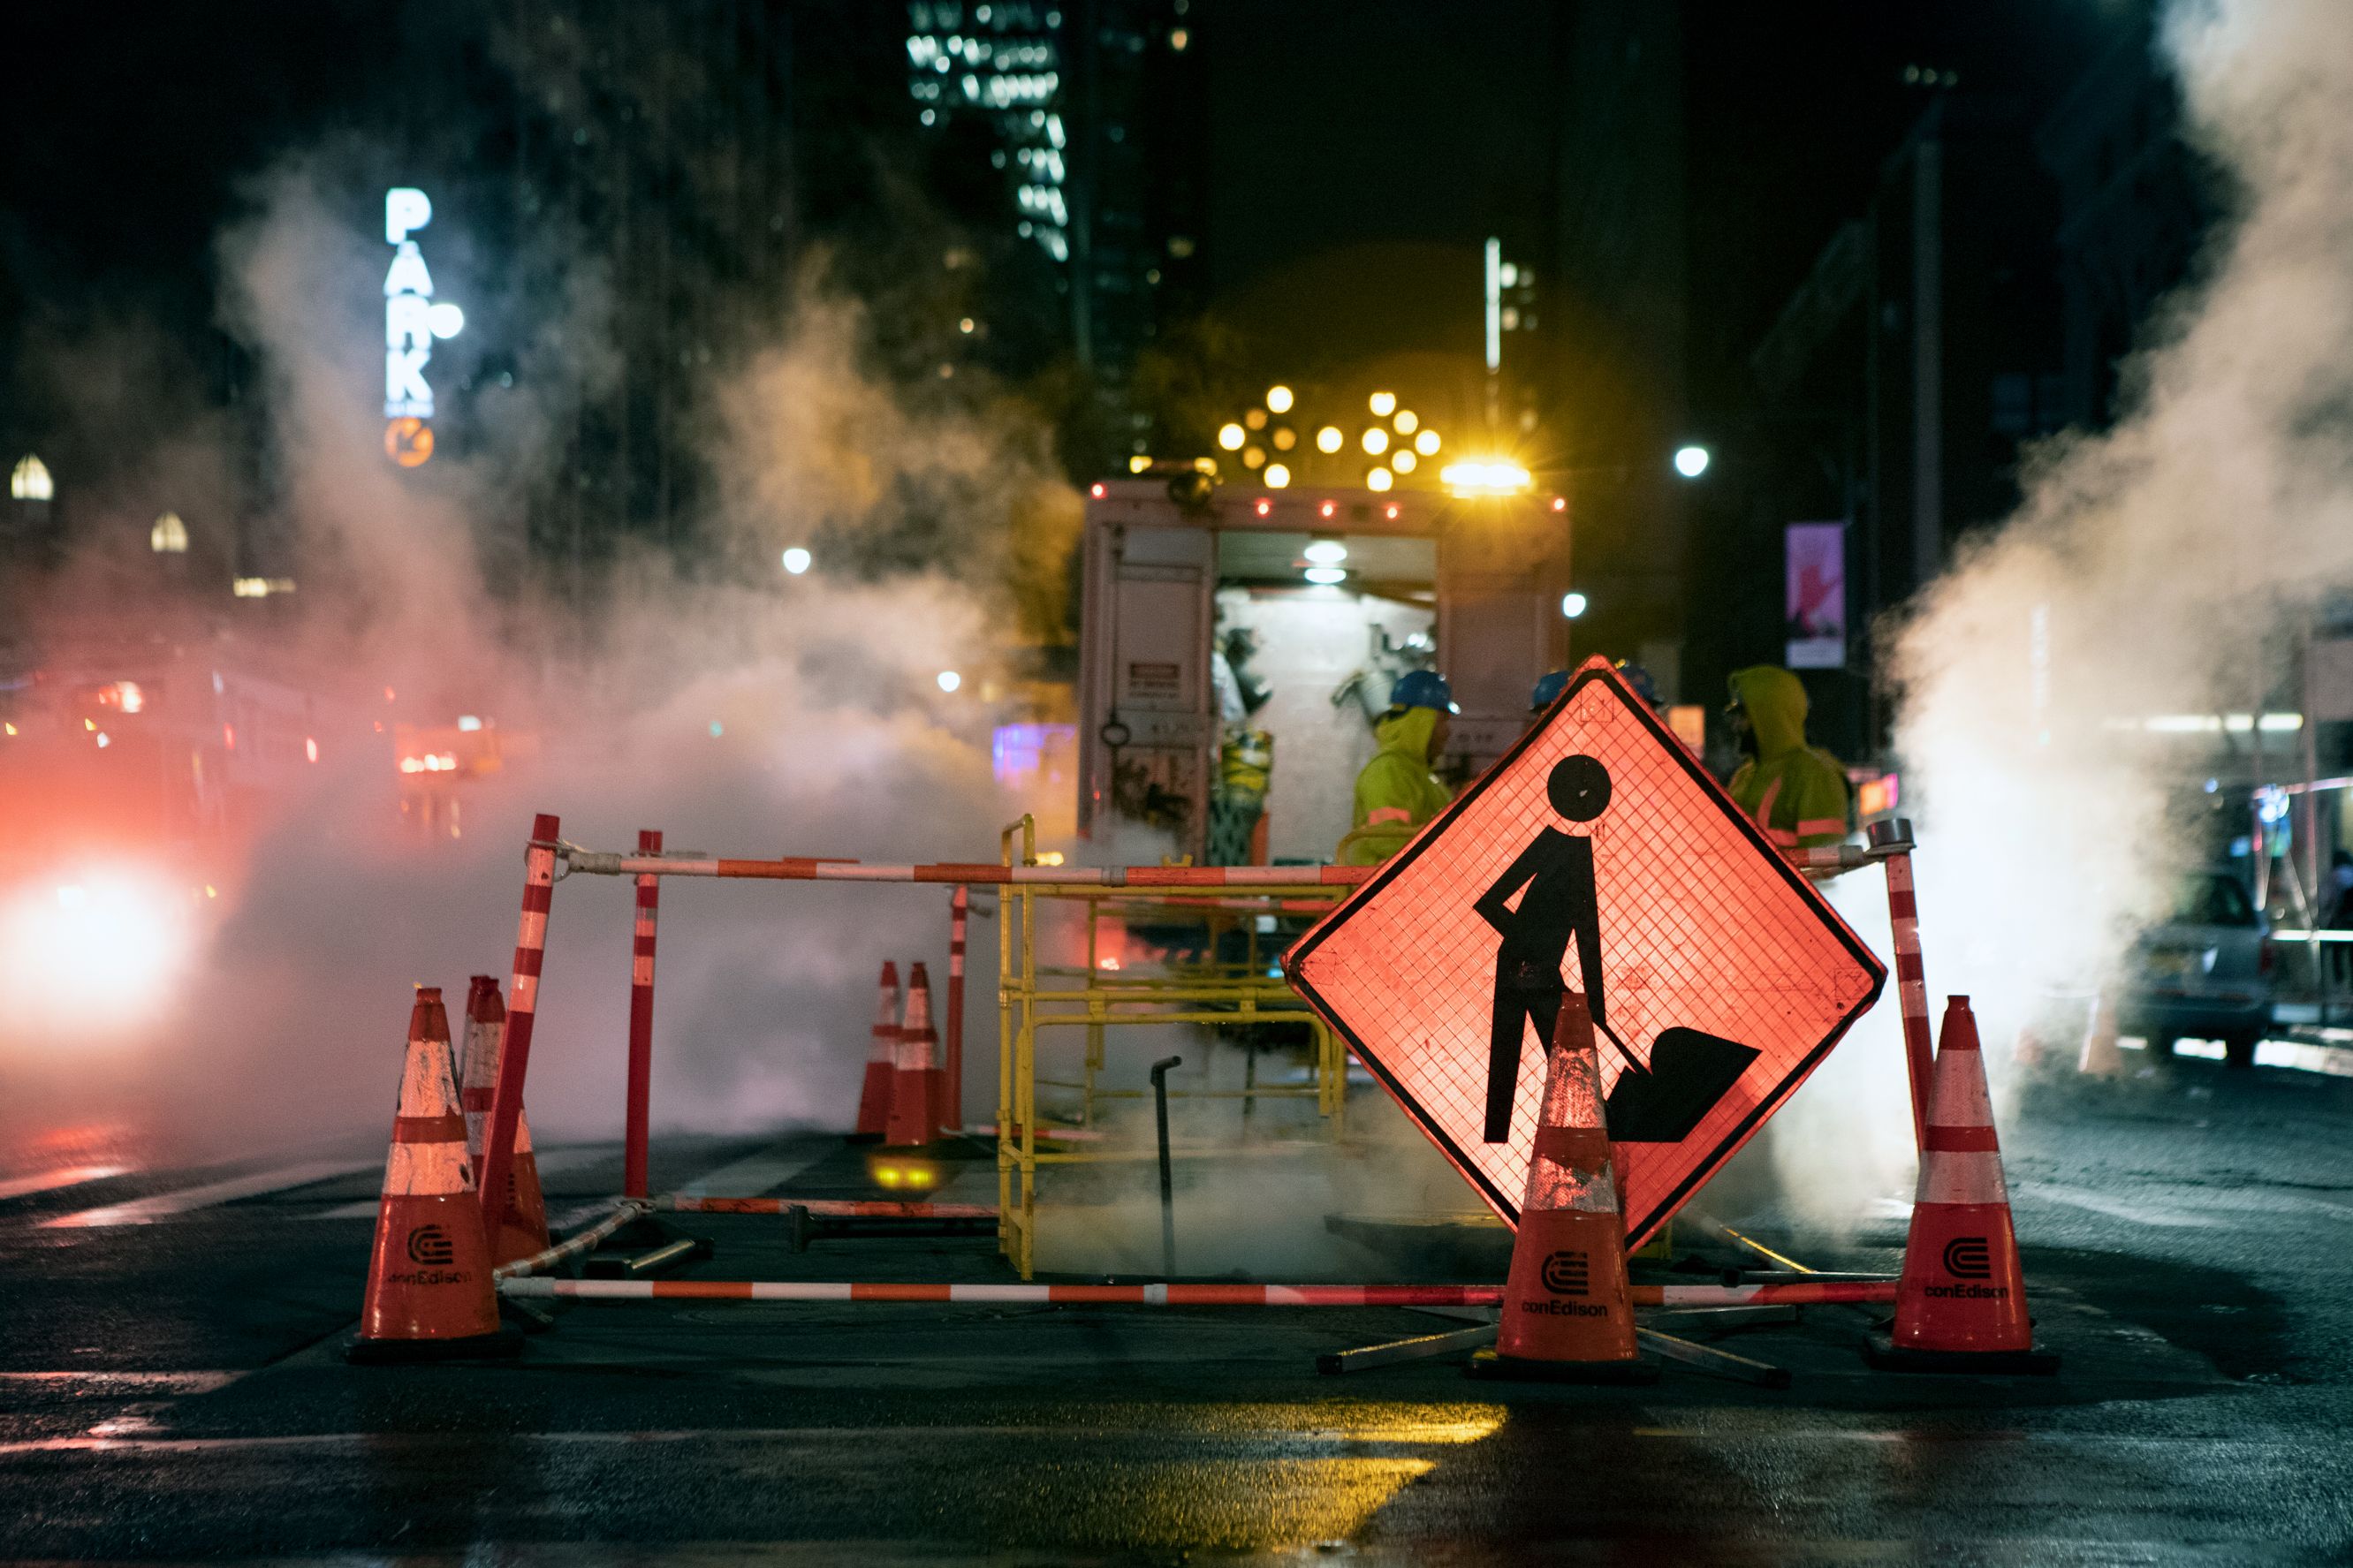 Utility workers at a manhole on Eighth Avenue in Midtown, Nov. 18, 2019.